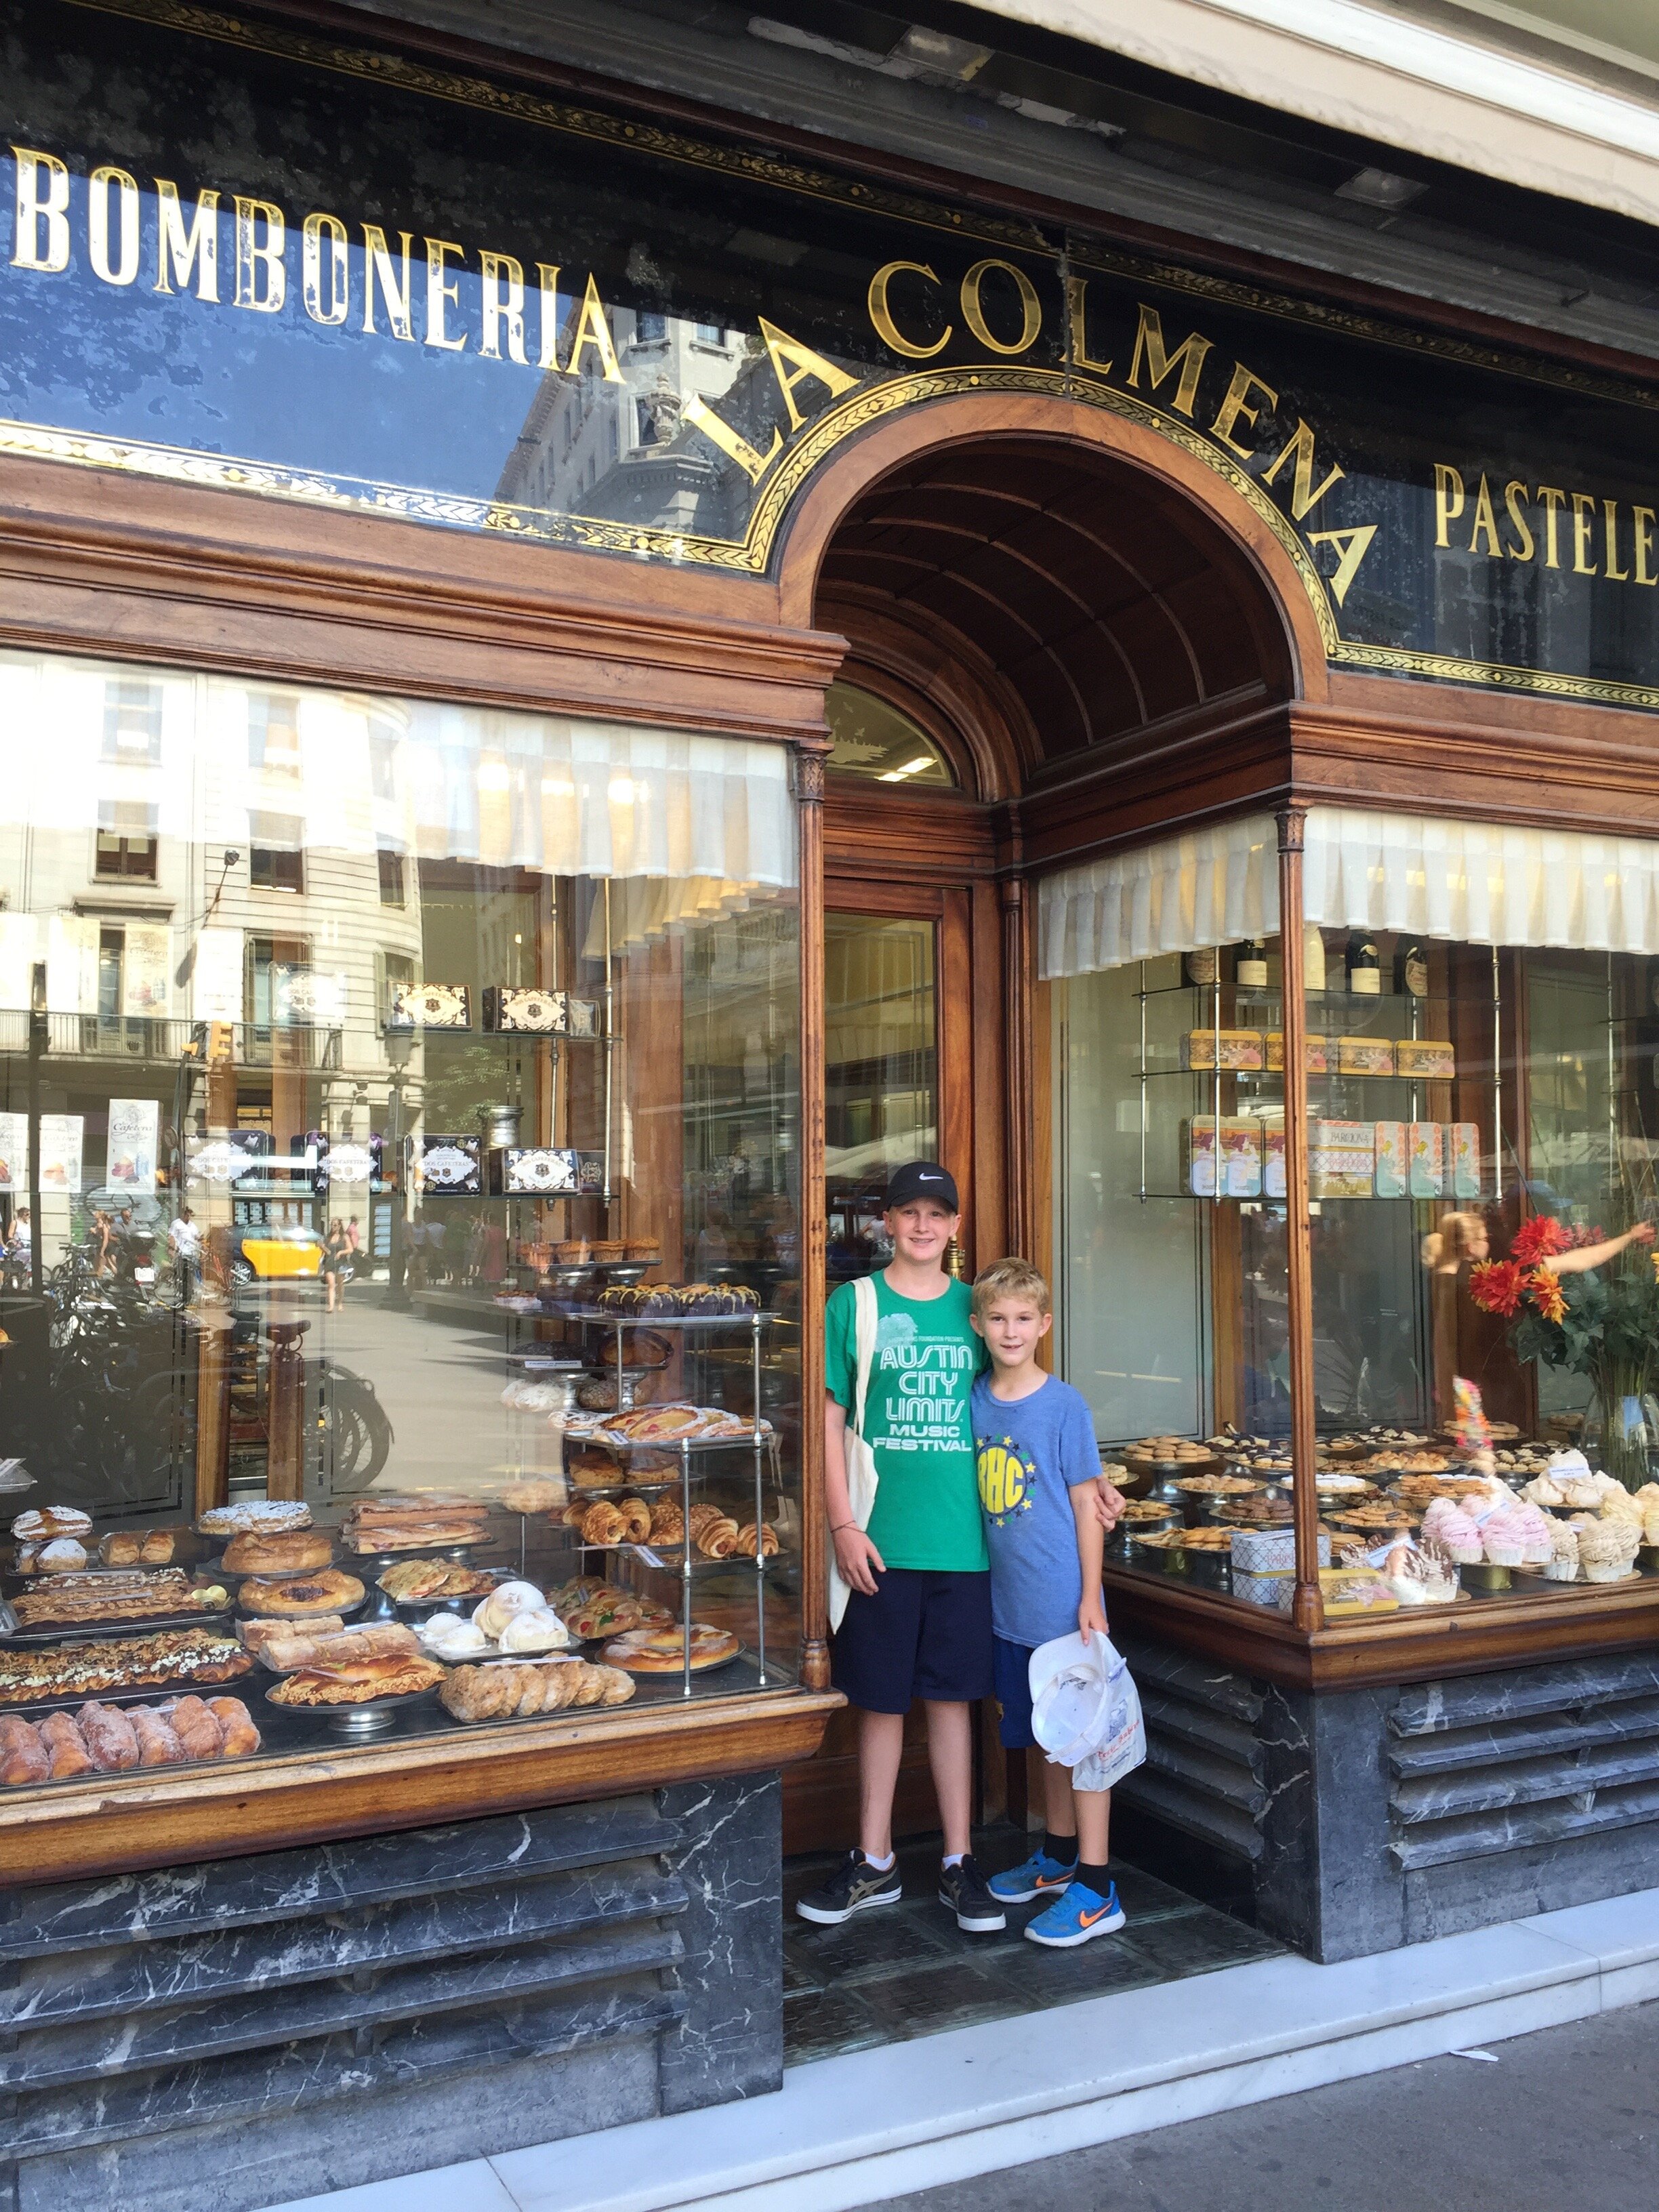 The Dulceria in Barcelona that inspired the final chapter of The Jetsetters.